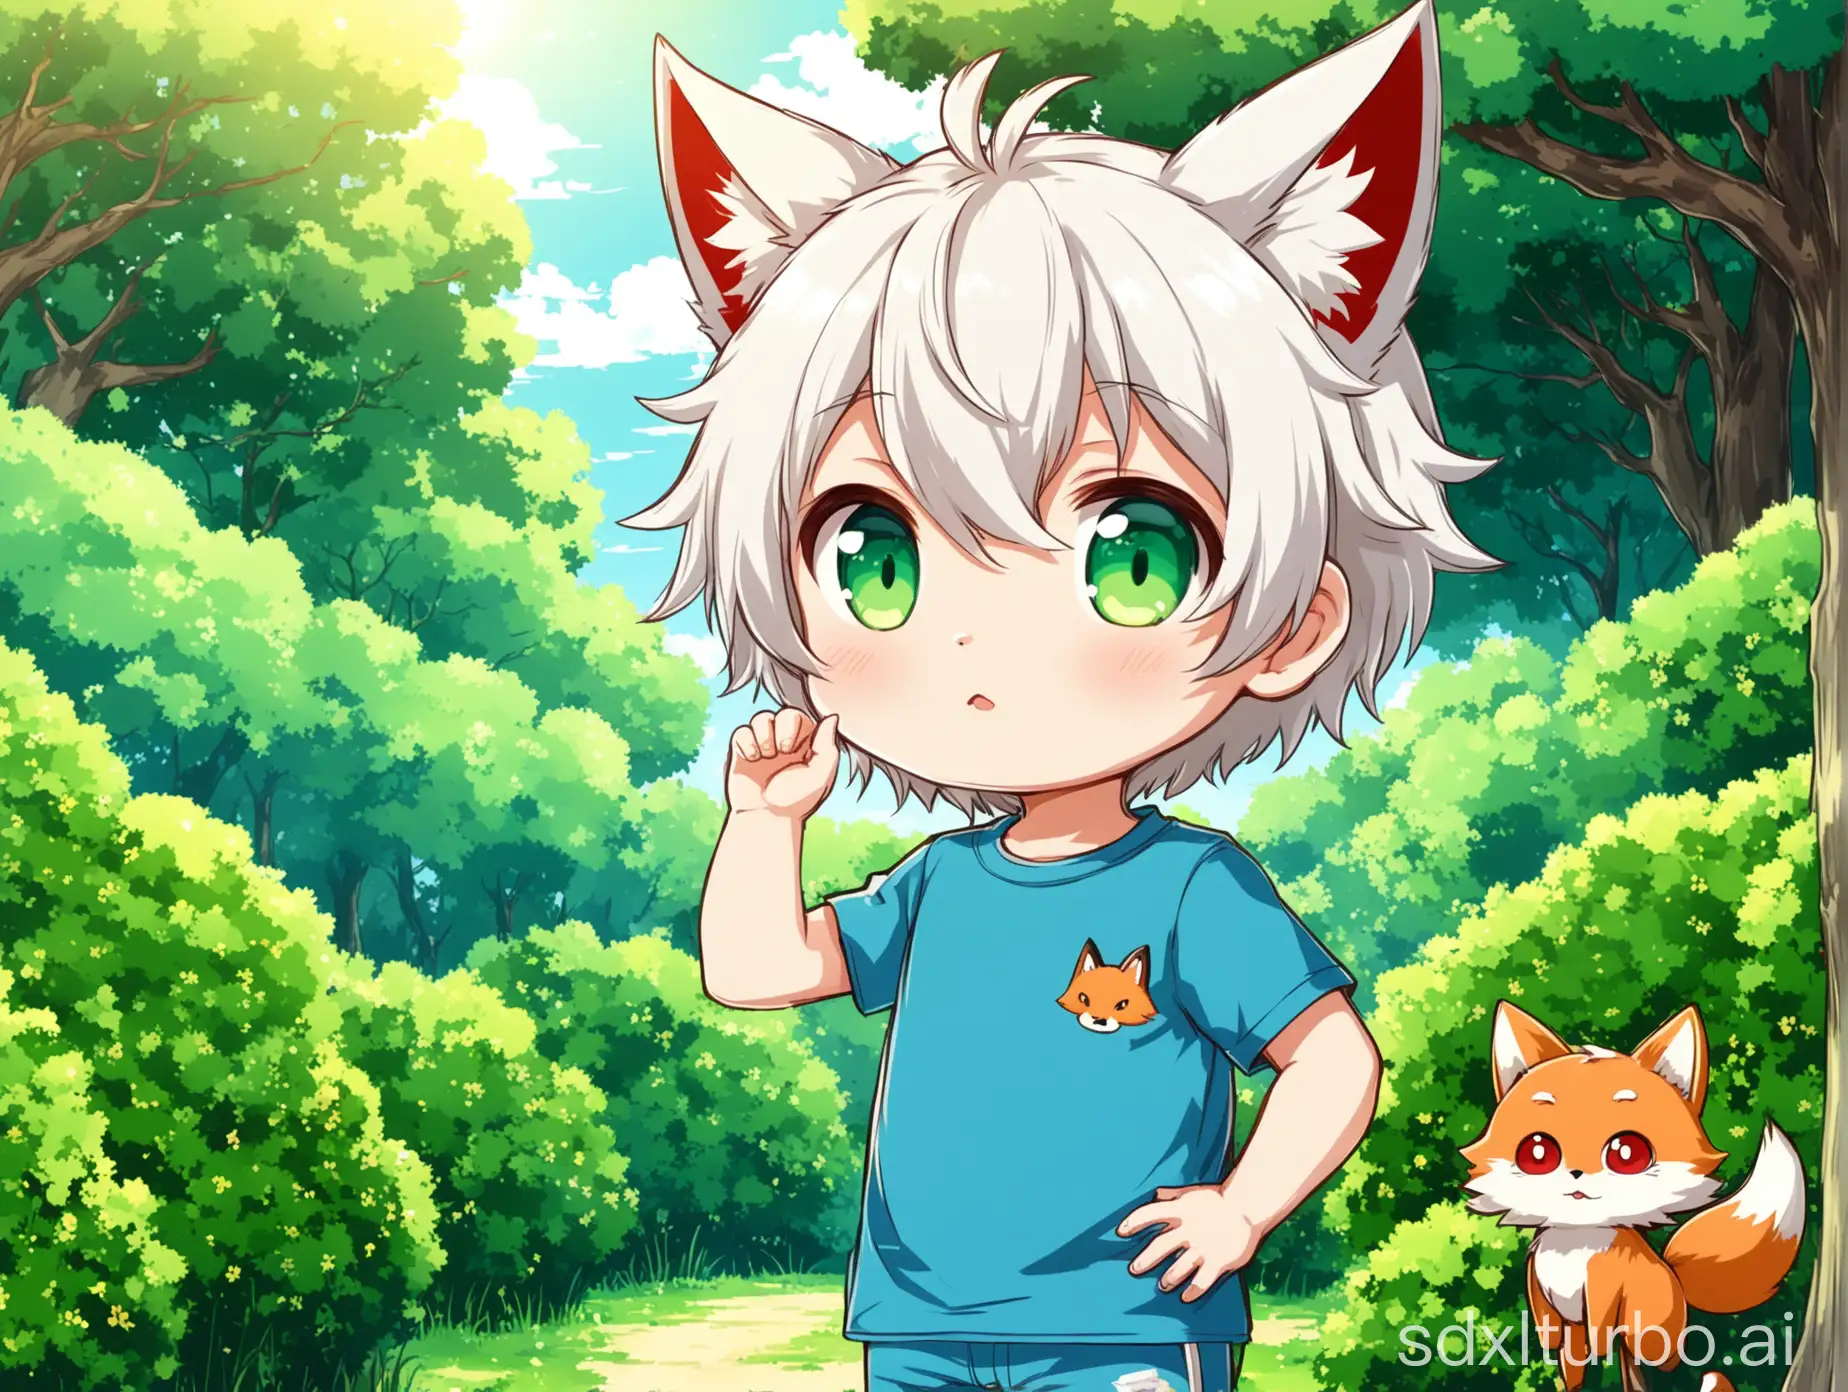 a cat boy, shota, wCharacter Description: young child, chibi style, white hair, big green eyes, wearing animal ears (cat/fox ears) Clothing: blue t-shirt with a cartoon animal print, red shorts, white socks, barefoot Pose: standing, one arm raised, slightly tilted head Background: outdoors, sunny day, greenery, bushes, trees, birds flying in the sky Art Style: anime, bright colors, detailed background, soft shading Expression: curious, innocent, slight blush